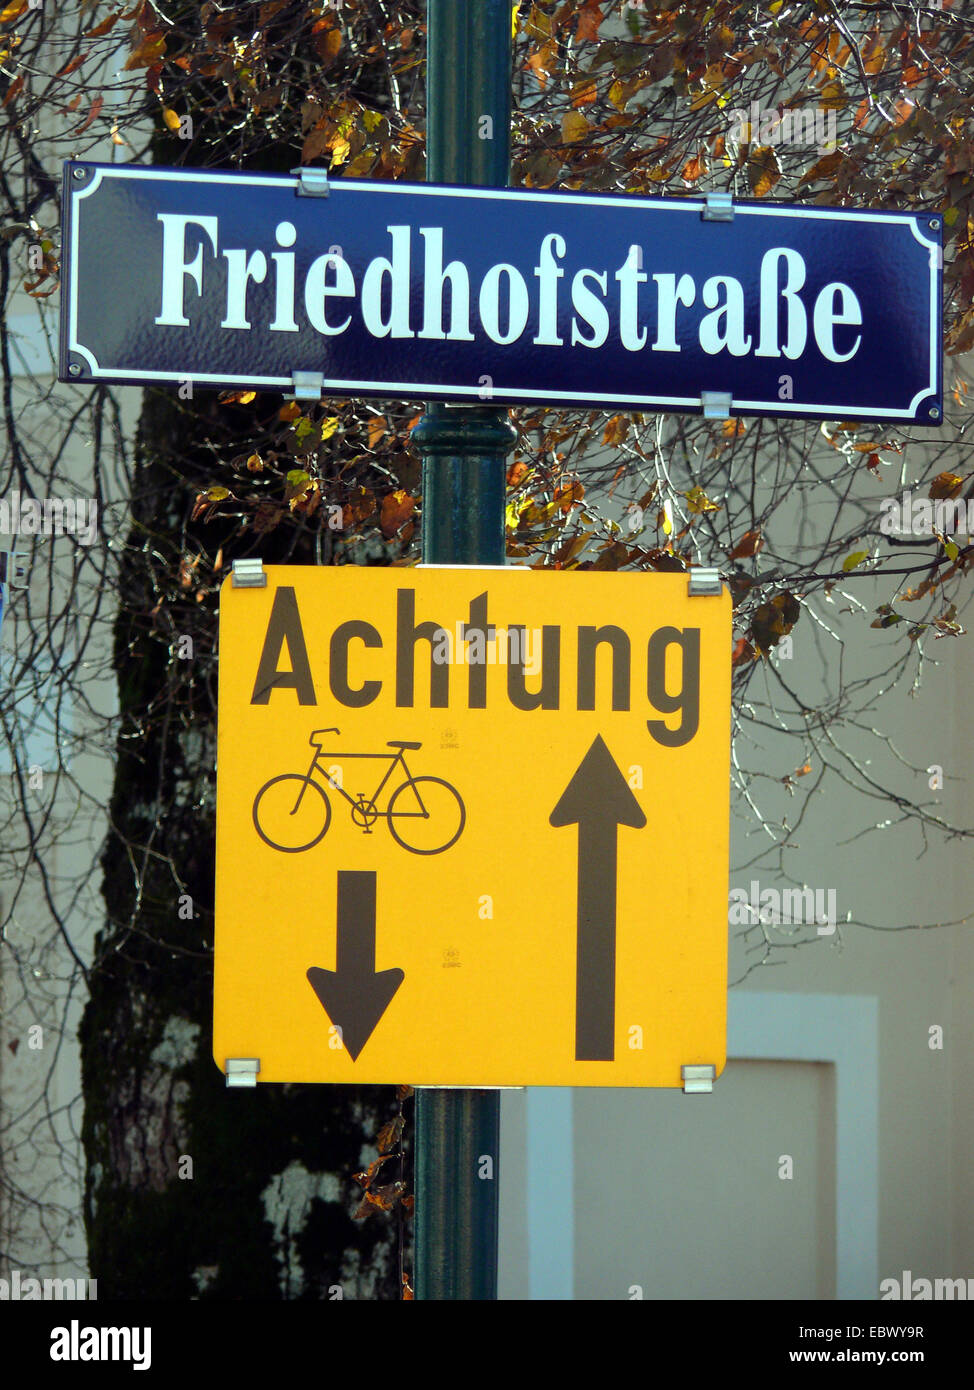 attention two-way traffic, Friedhofstrasse Stock Photo